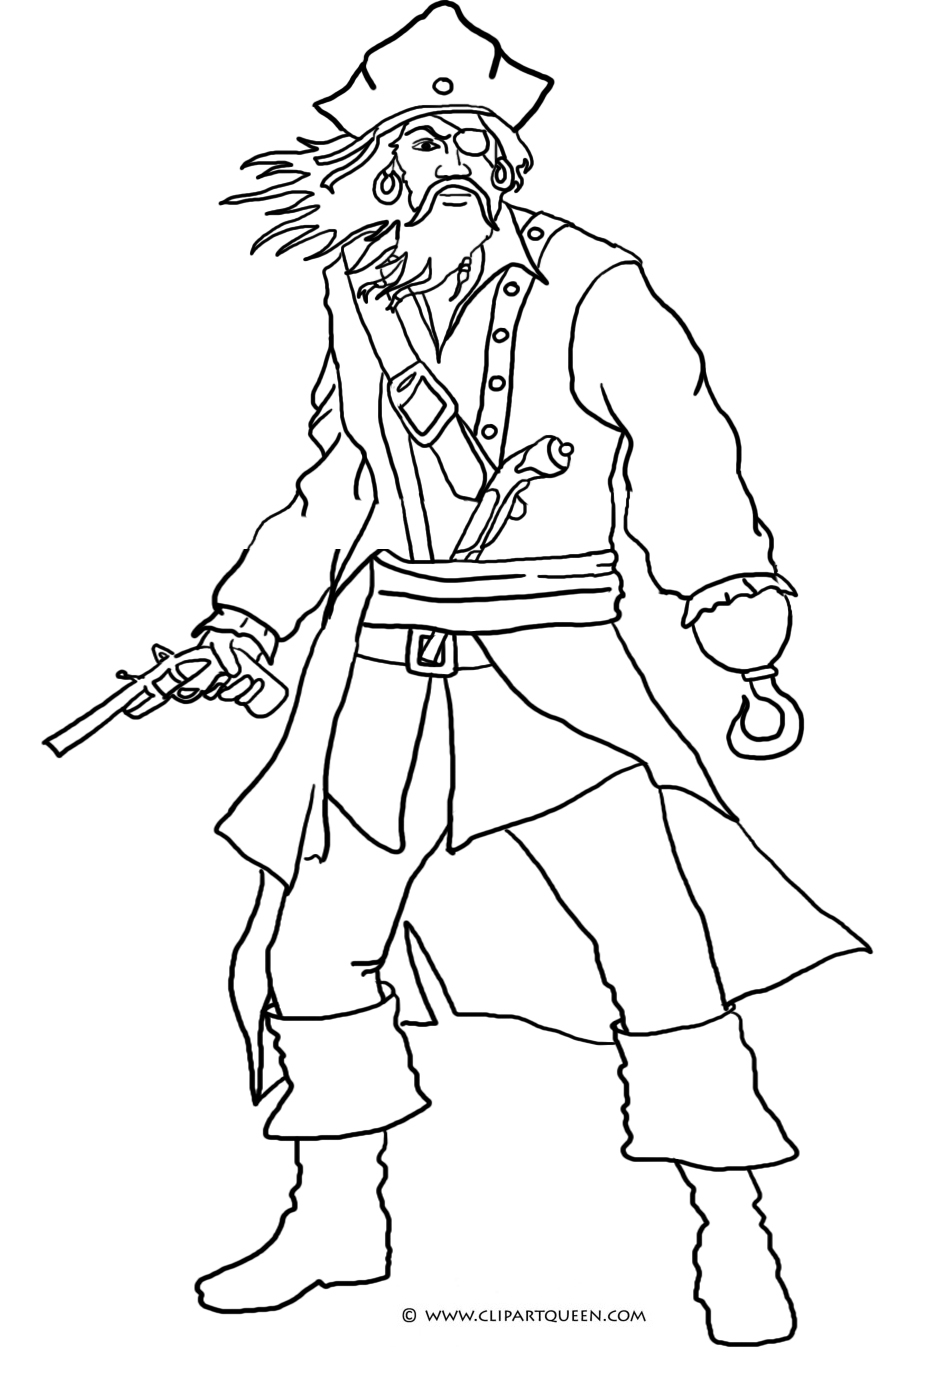 Easy Pirate Drawing at GetDrawings Free download